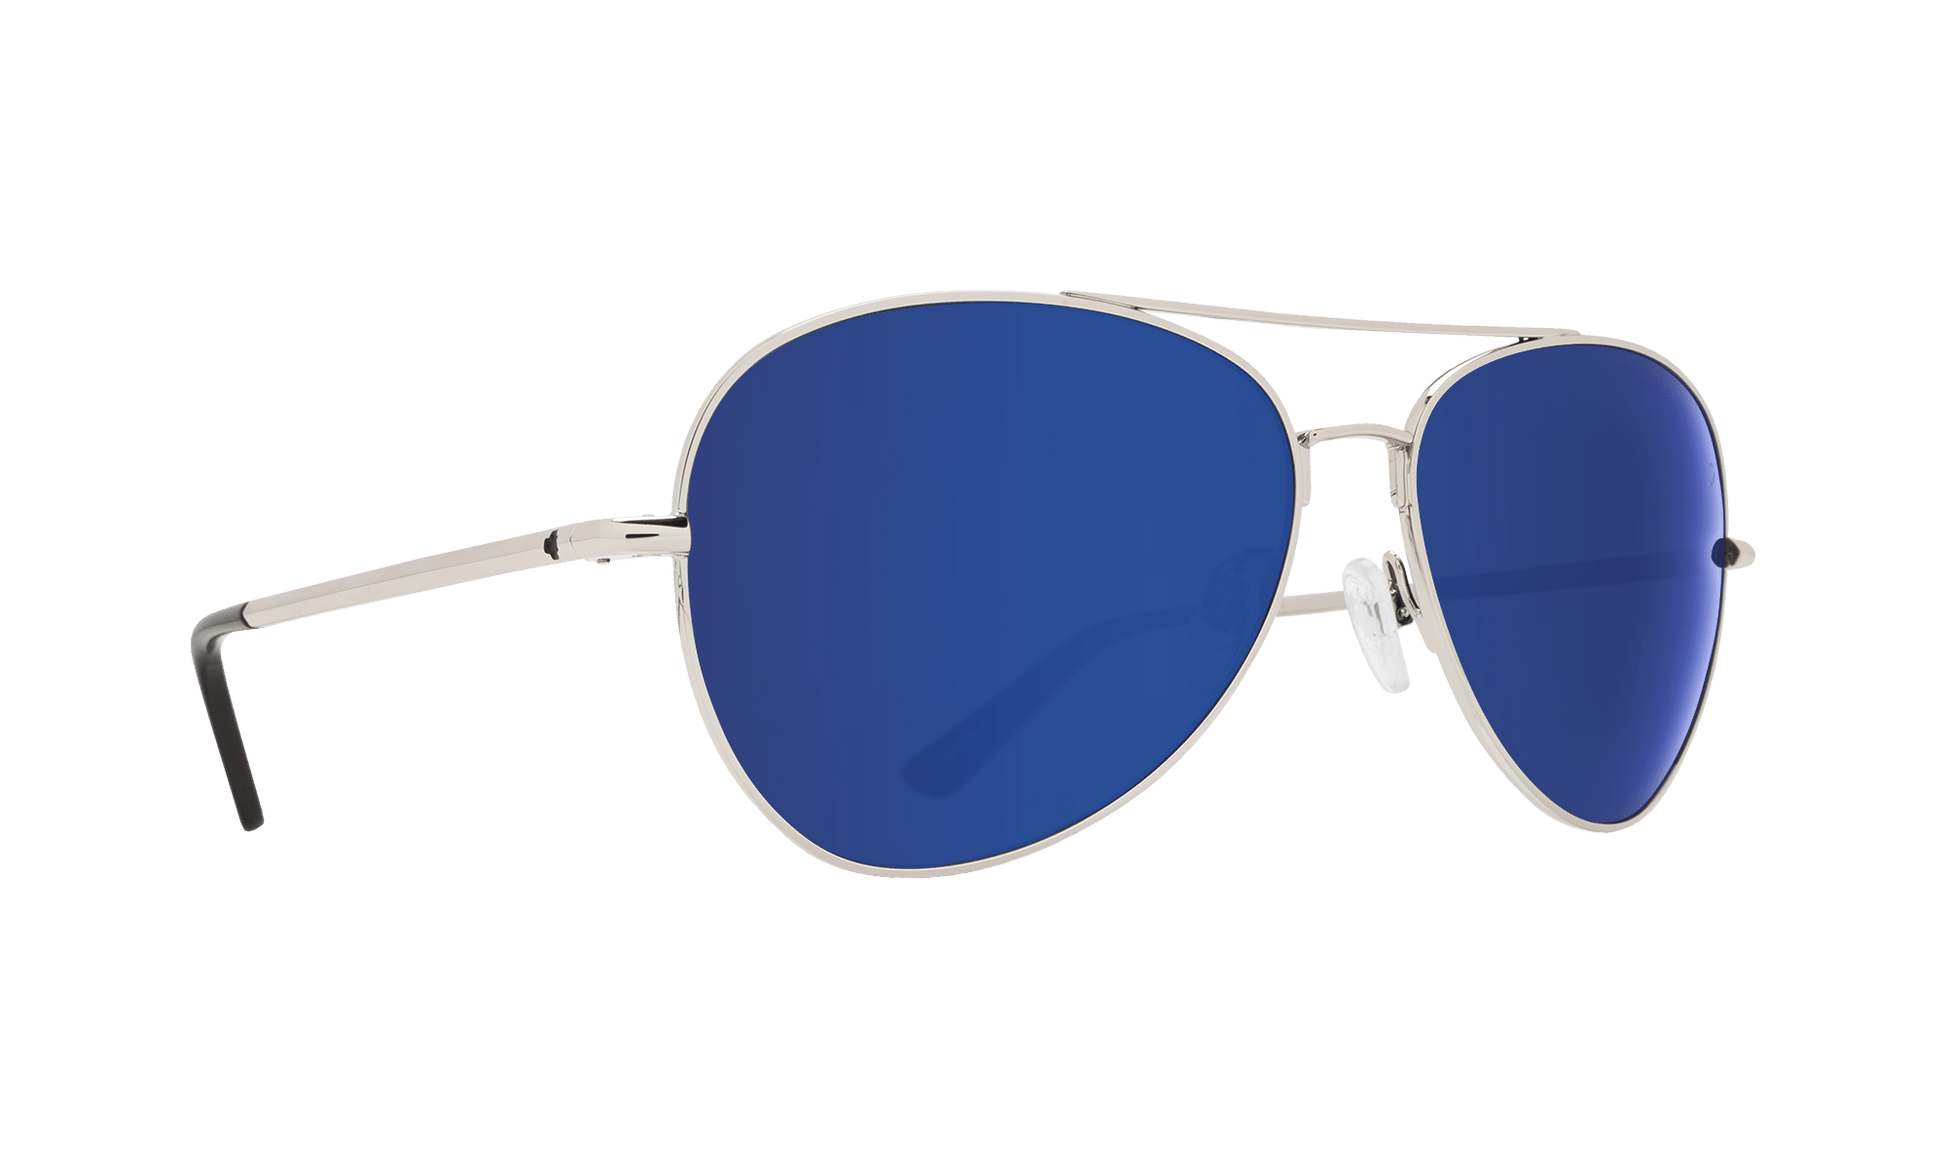 SPY Whistler Sunglasses  Happy Gray Green with Dark Blue Spectra Silver  58-14-140